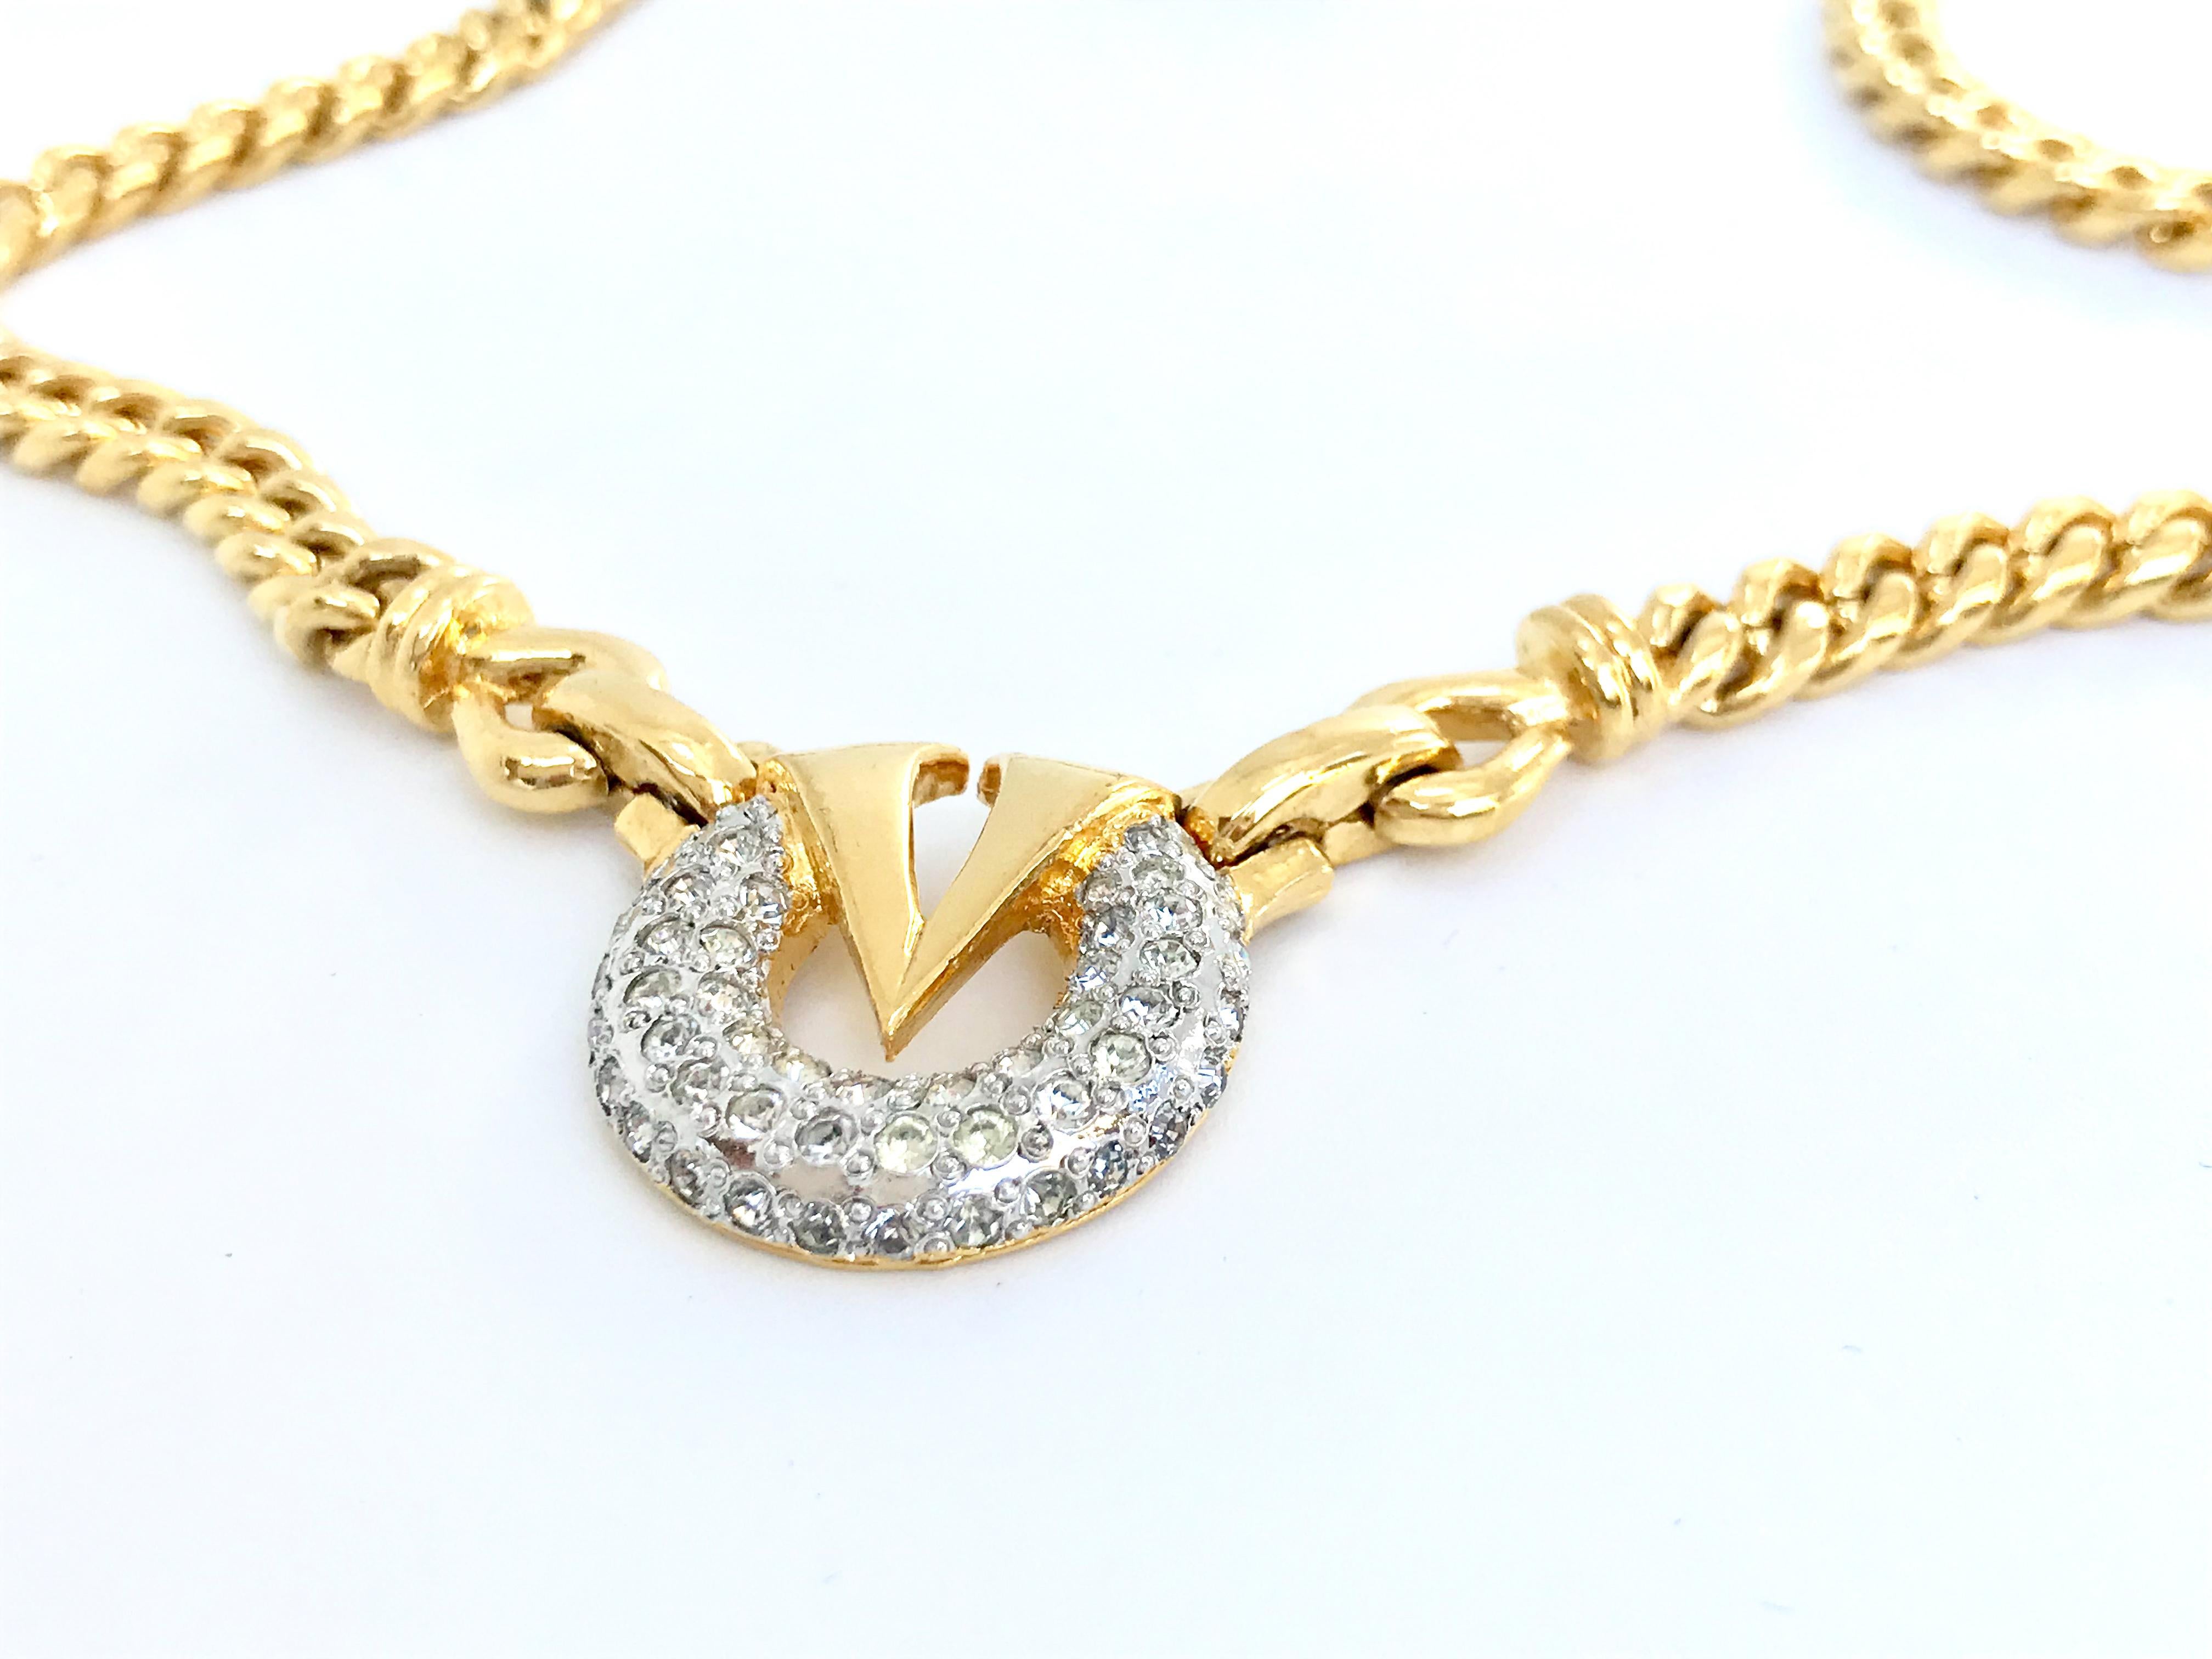 Valentino 90s vintage gold tone metal and glass crystal pendant necklace with chunky gold tone link chain. 

17 inches long and with  fold over clasp. 
Pendant diameter approx 1 inch

Features a 'V' to the centre with sparkling glass crystals.